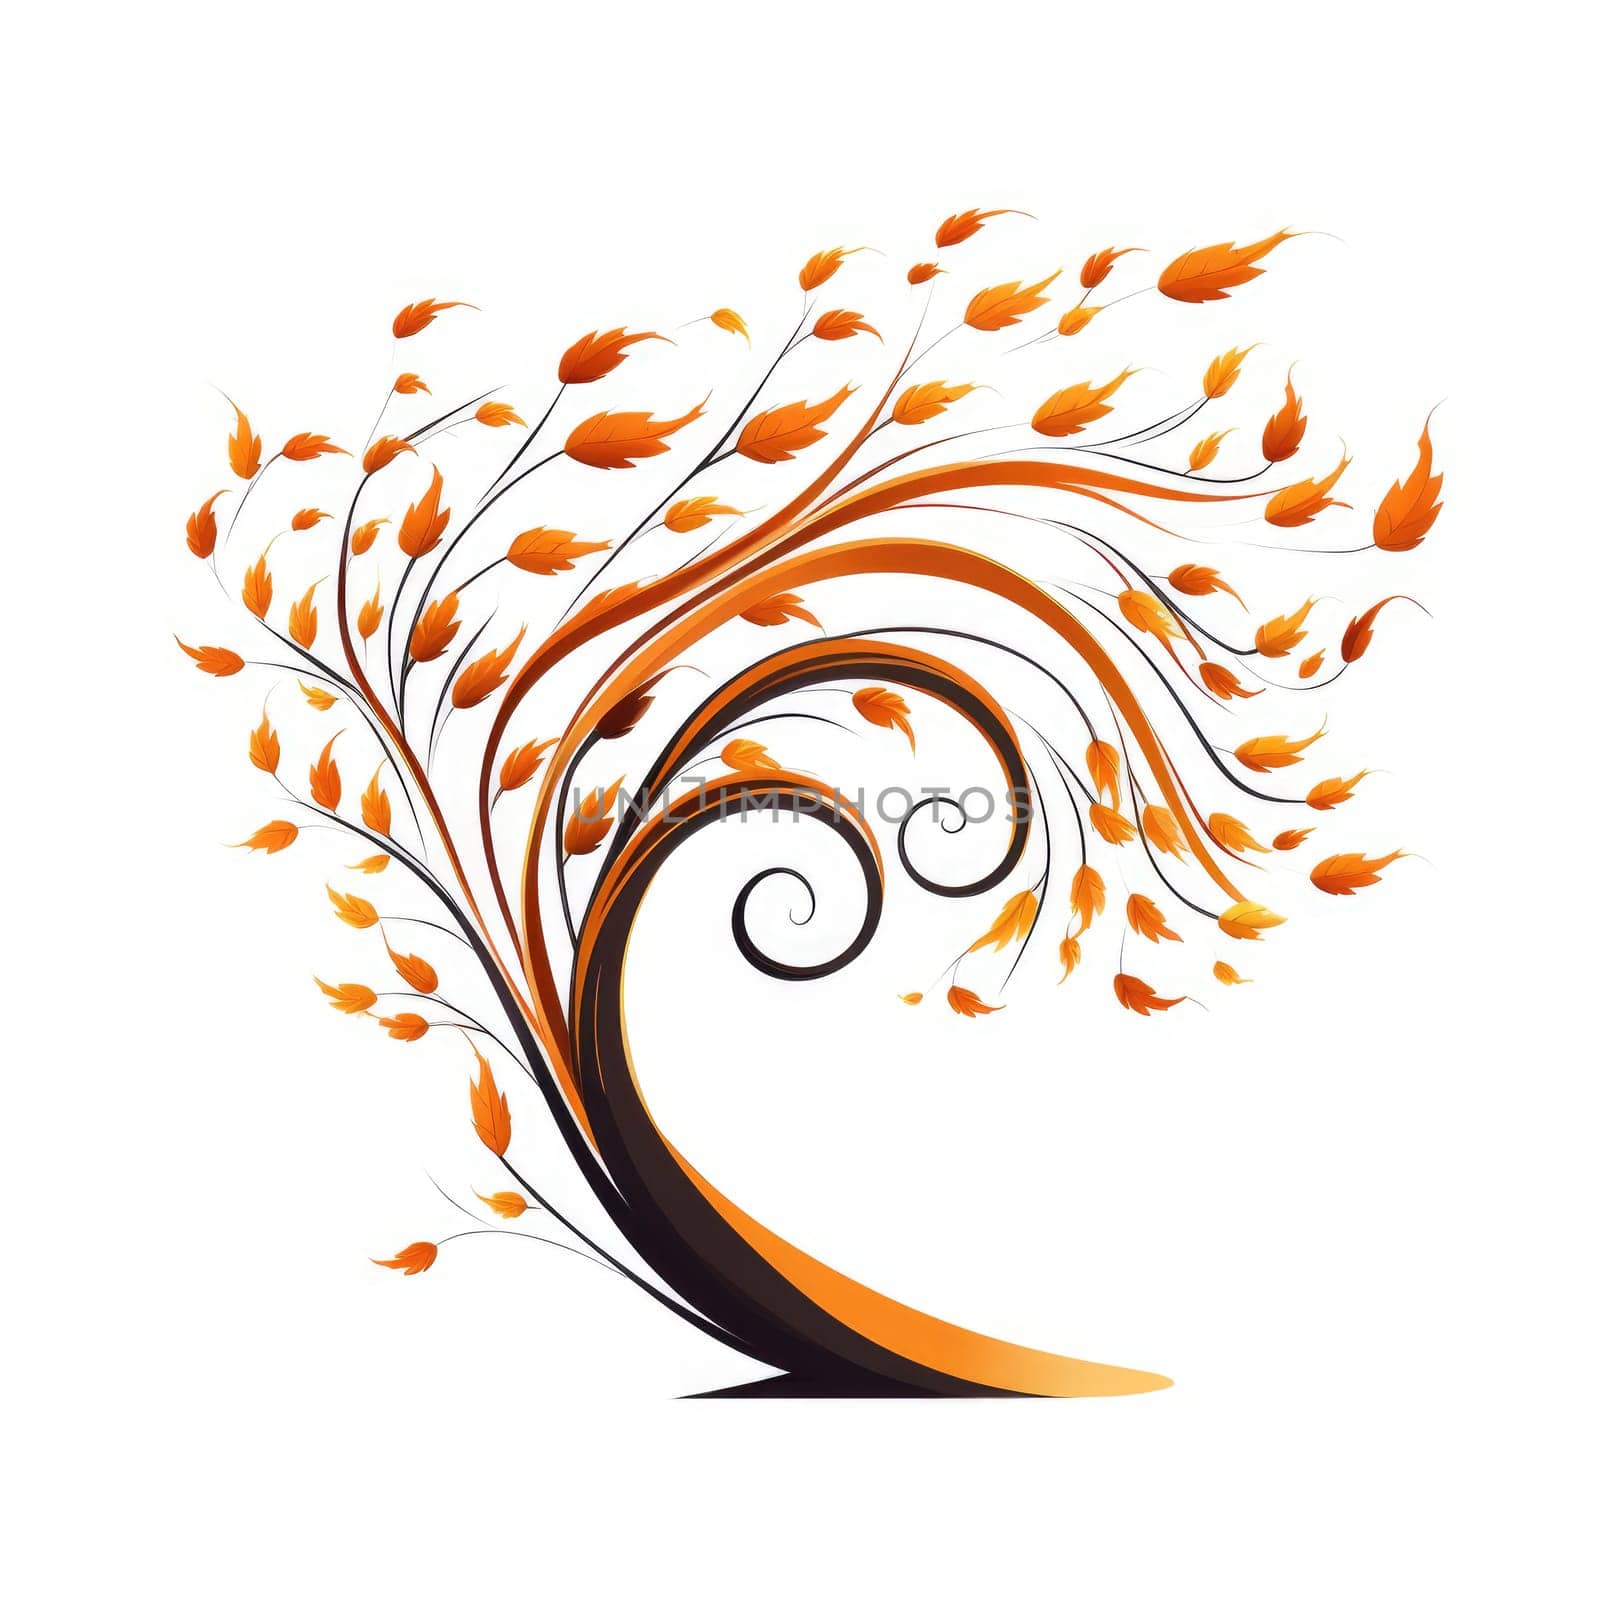 Autumn tree in the wind in minimalistic decorative art style isolated on white background. Ecology logo style